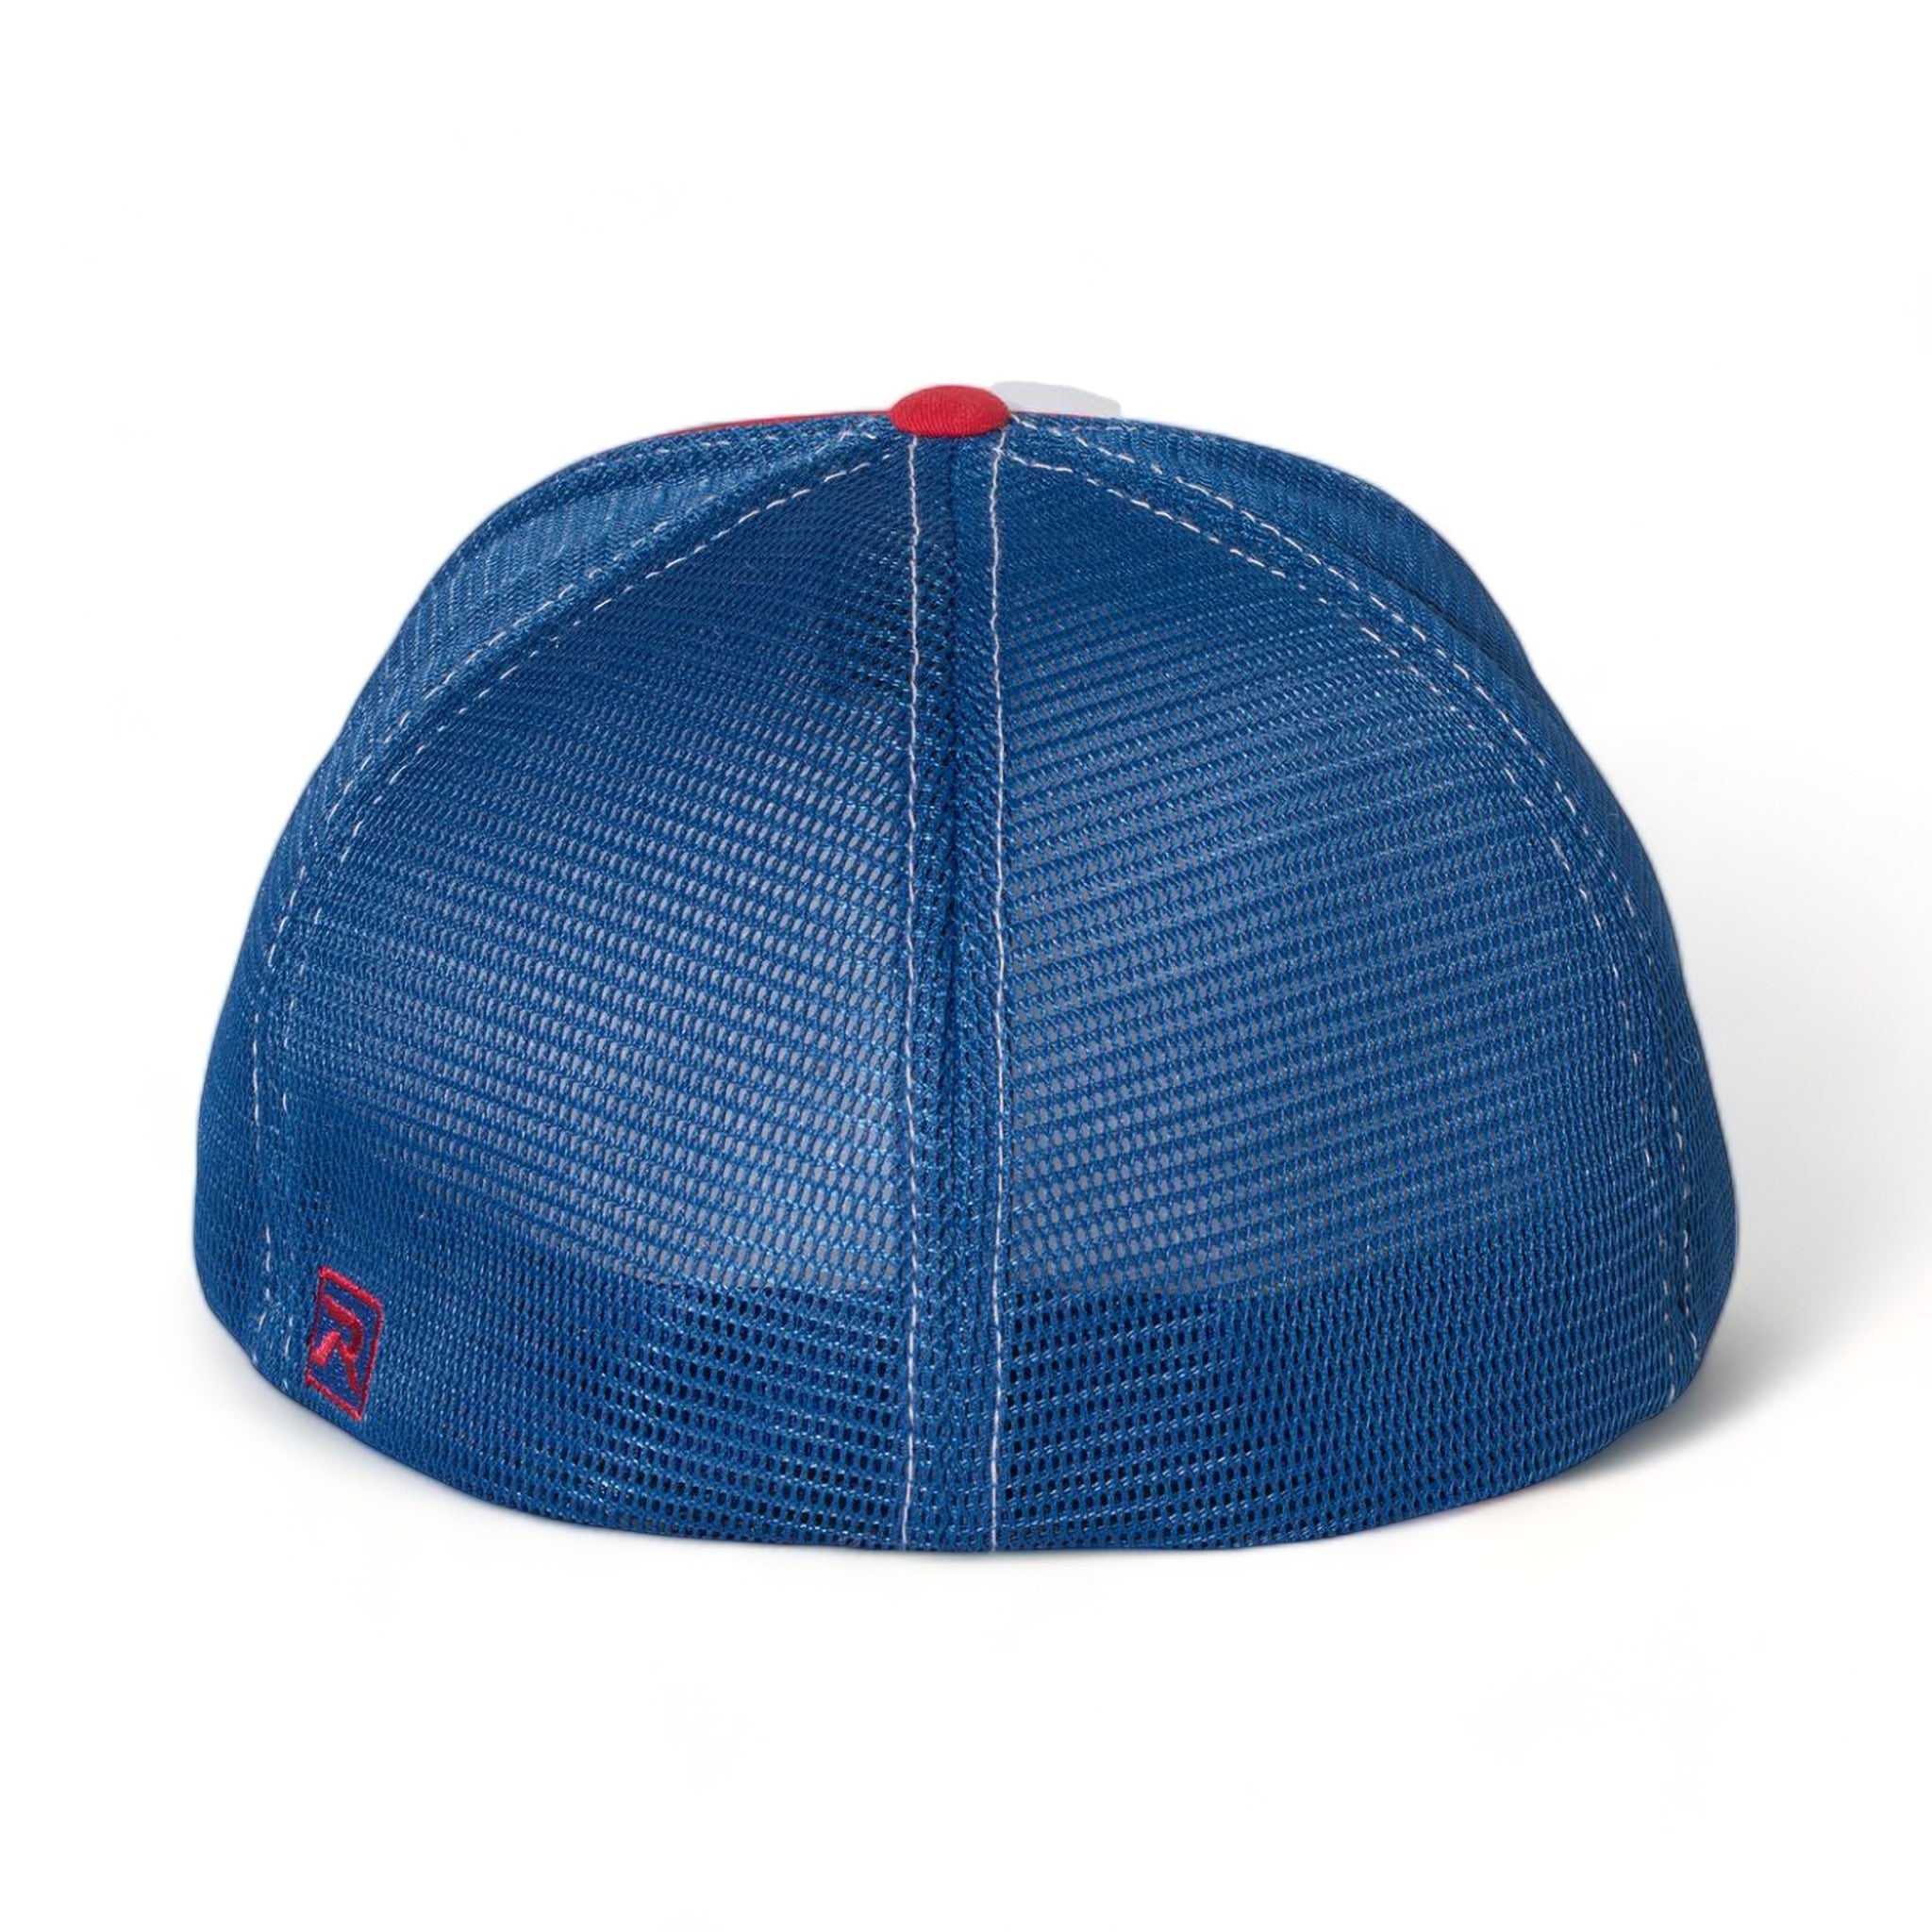 Back view of Richardson 172 custom hat in white, royal and red tri